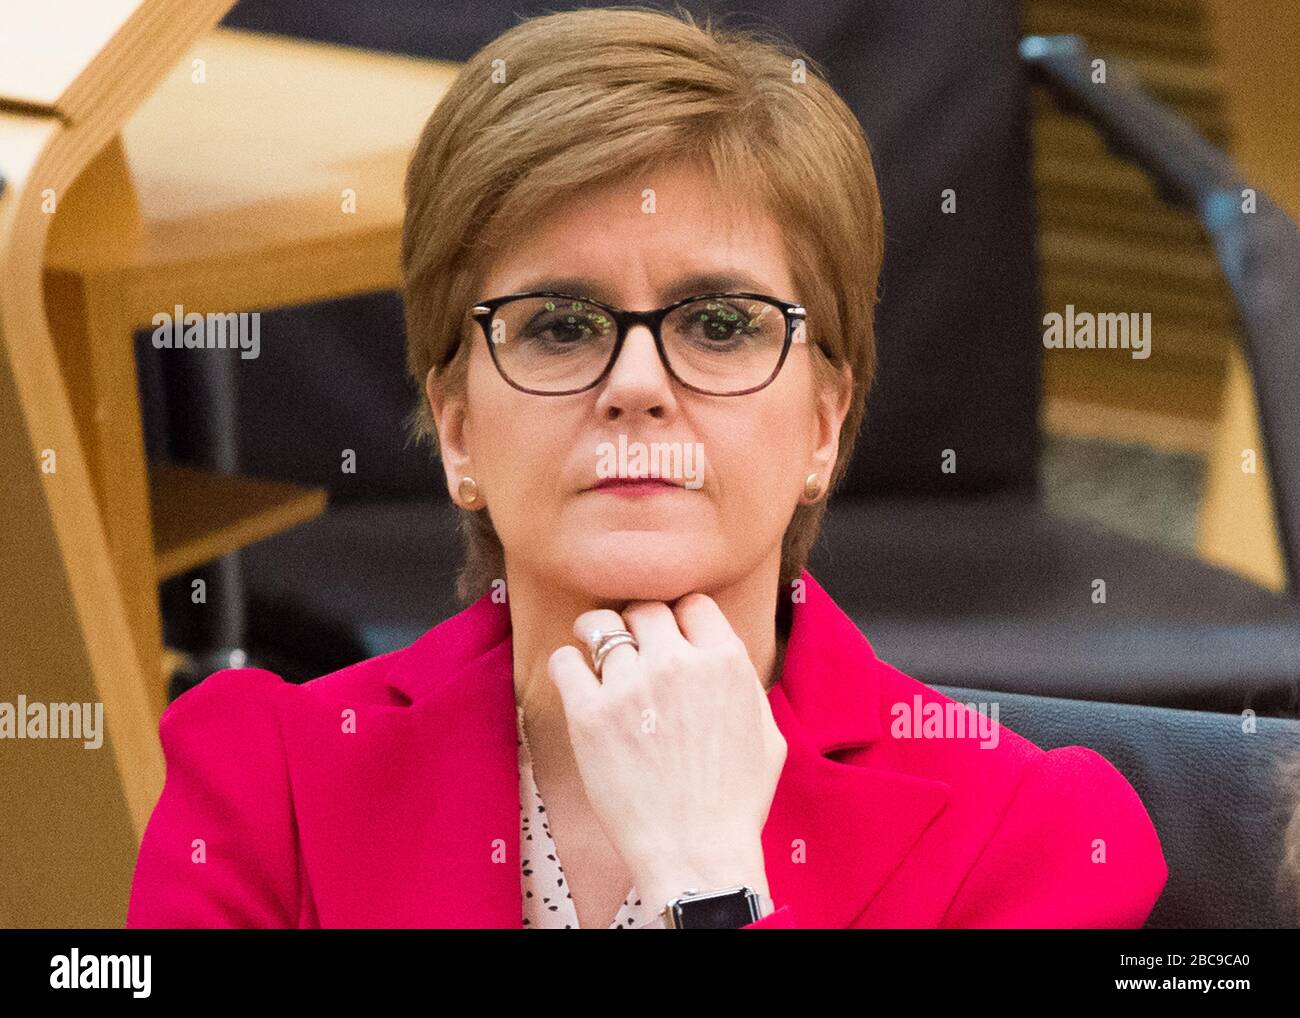 Edinburgh, UK. 3 March 2020.   Pictured: Nicola Sturgeon MSP - First Minister of Scotland and Leader of the Scottish National Party.  Scenes from First Ministers Questions at the Scottish Parliament in Holyrood, Edinburgh. Stock Photo